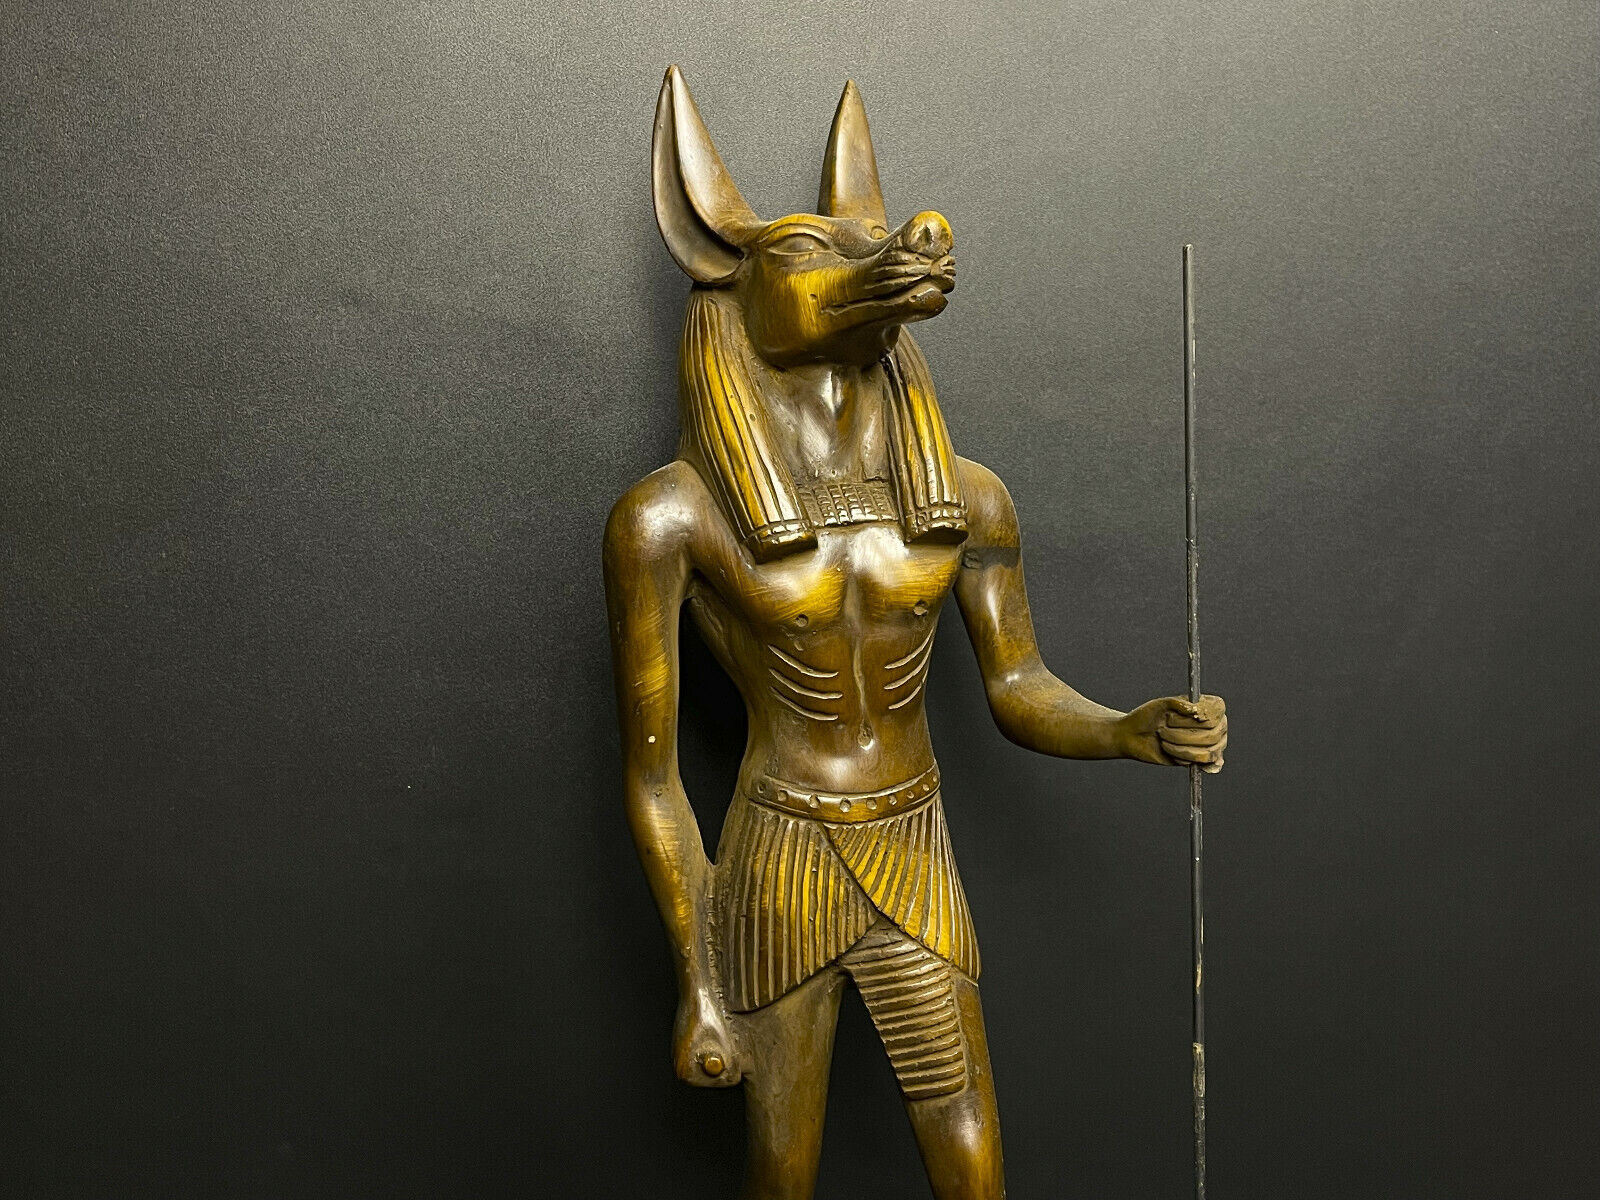 Fantastic Egyptian god of after life Doctor Anubis figurine -Holding Was-scepter